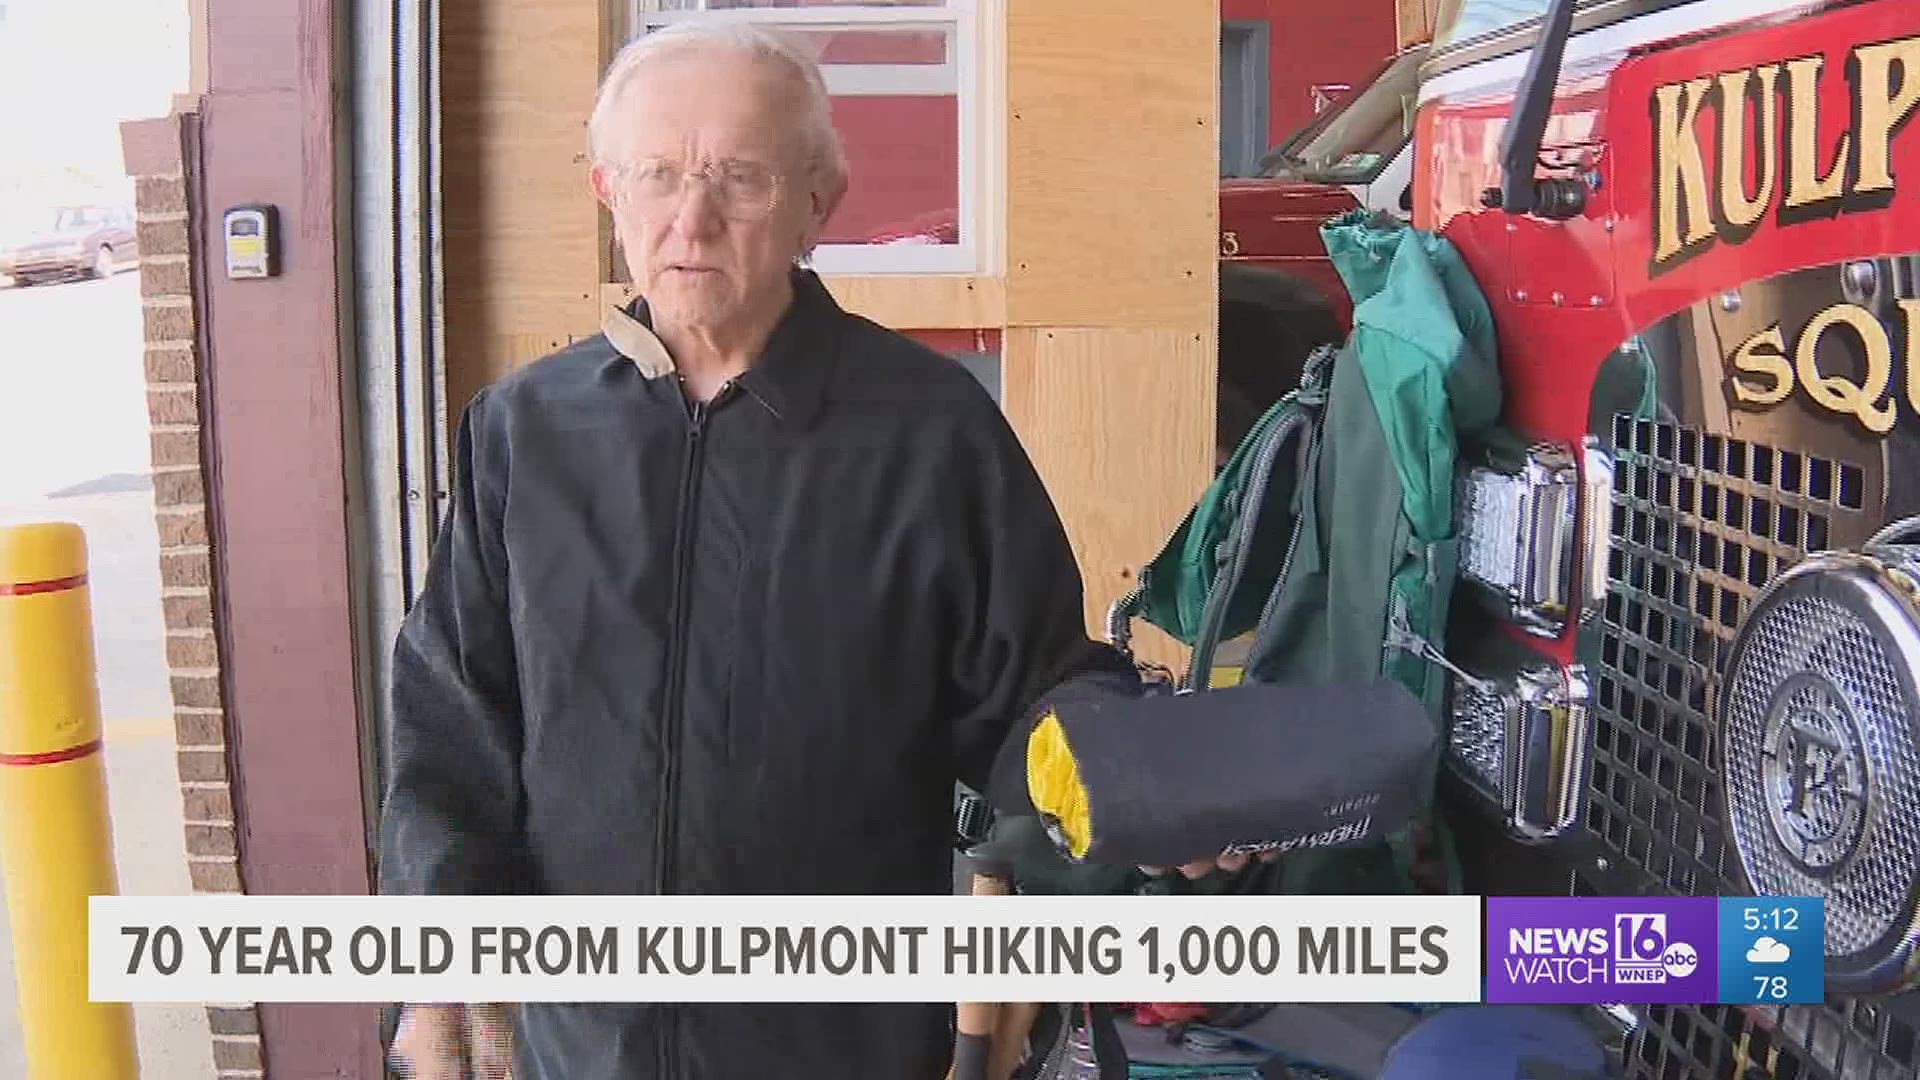 A veteran from Northumberland County, 70, began a hike two months ago in hopes of raising money for the Kulpmont Fire Department to buy a new firetruck.